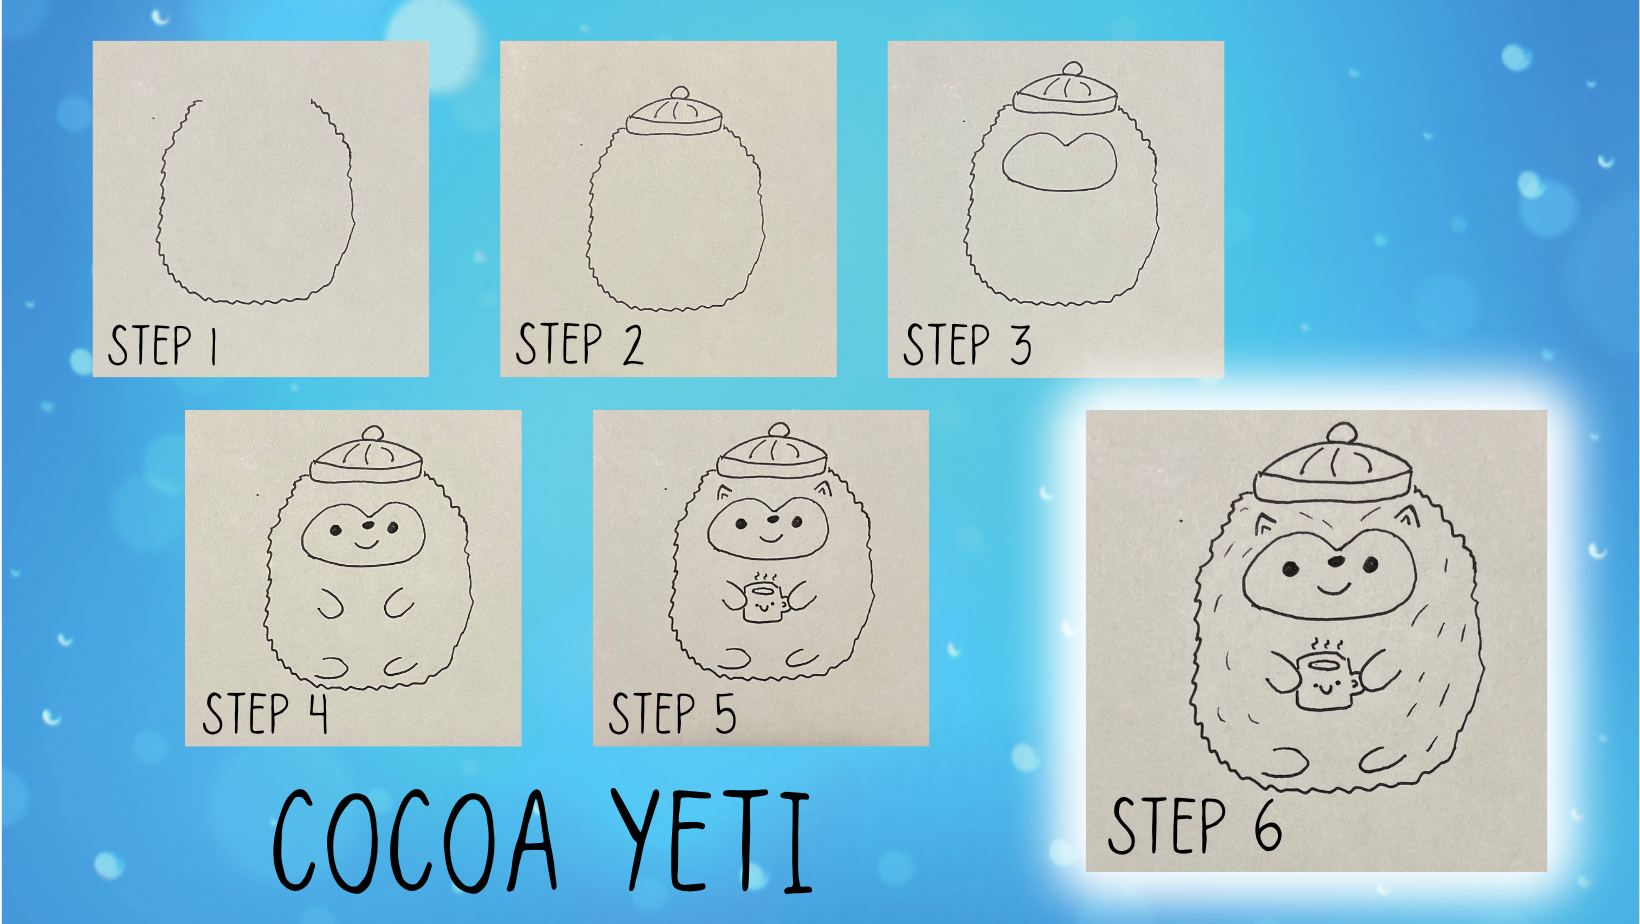 Cocoa Yeti in 6 steps